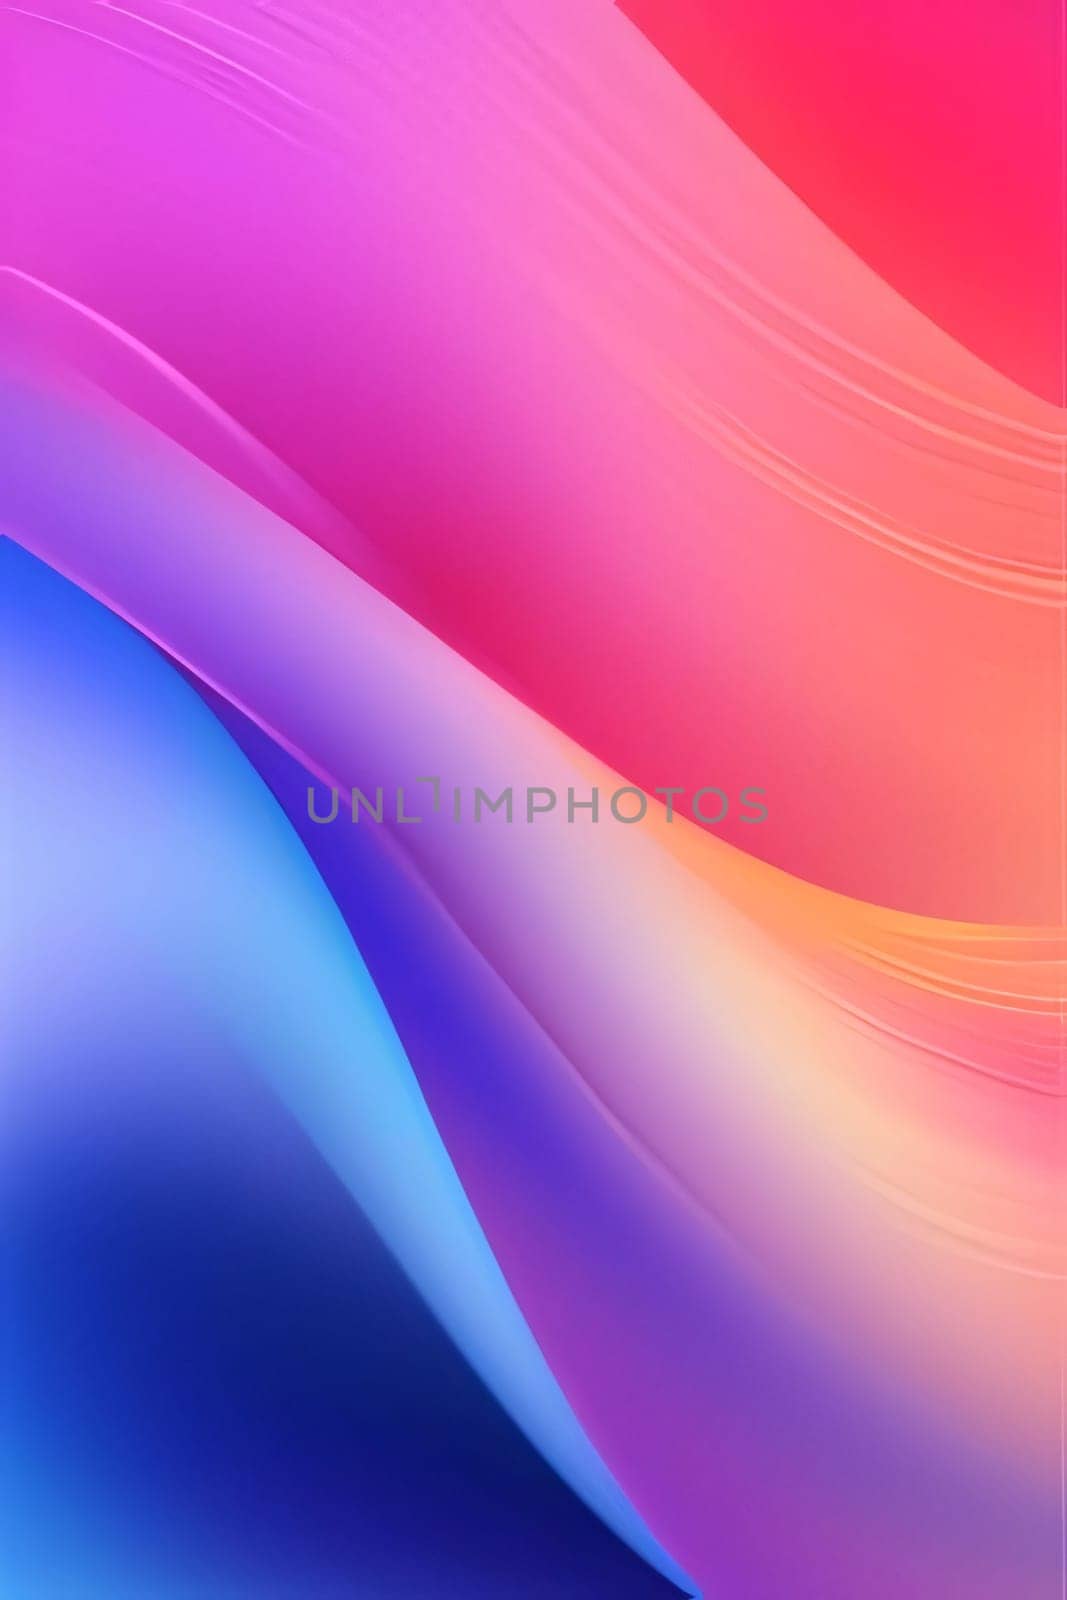 Abstract background design: abstract background with smooth lines in blue, pink and purple colors